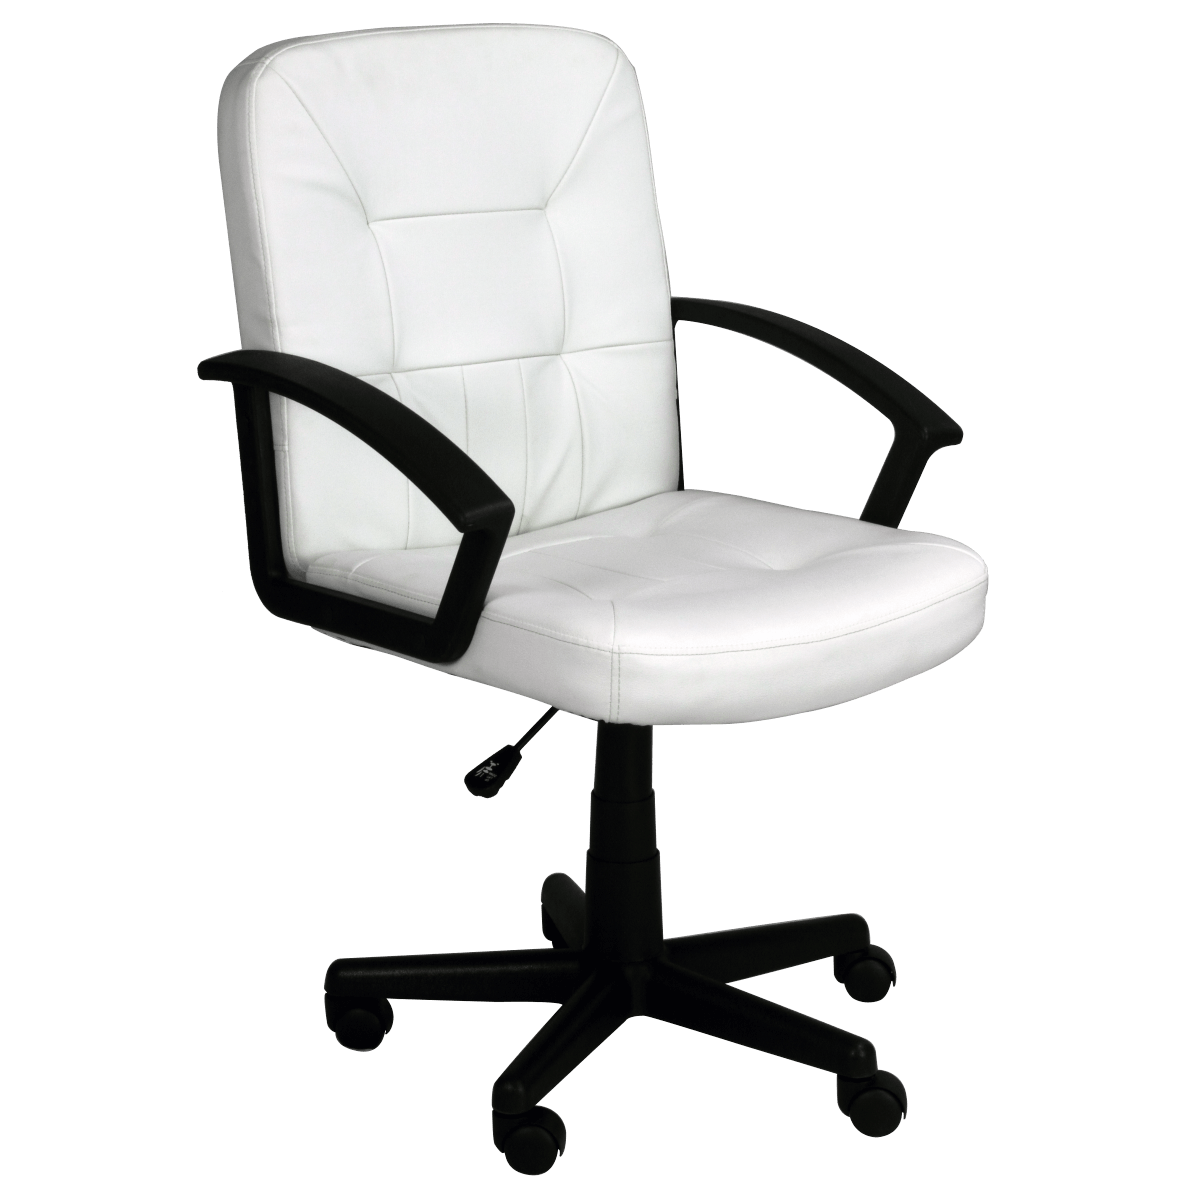 1 Result Images of Office Chair Top View Png - PNG Image Collection